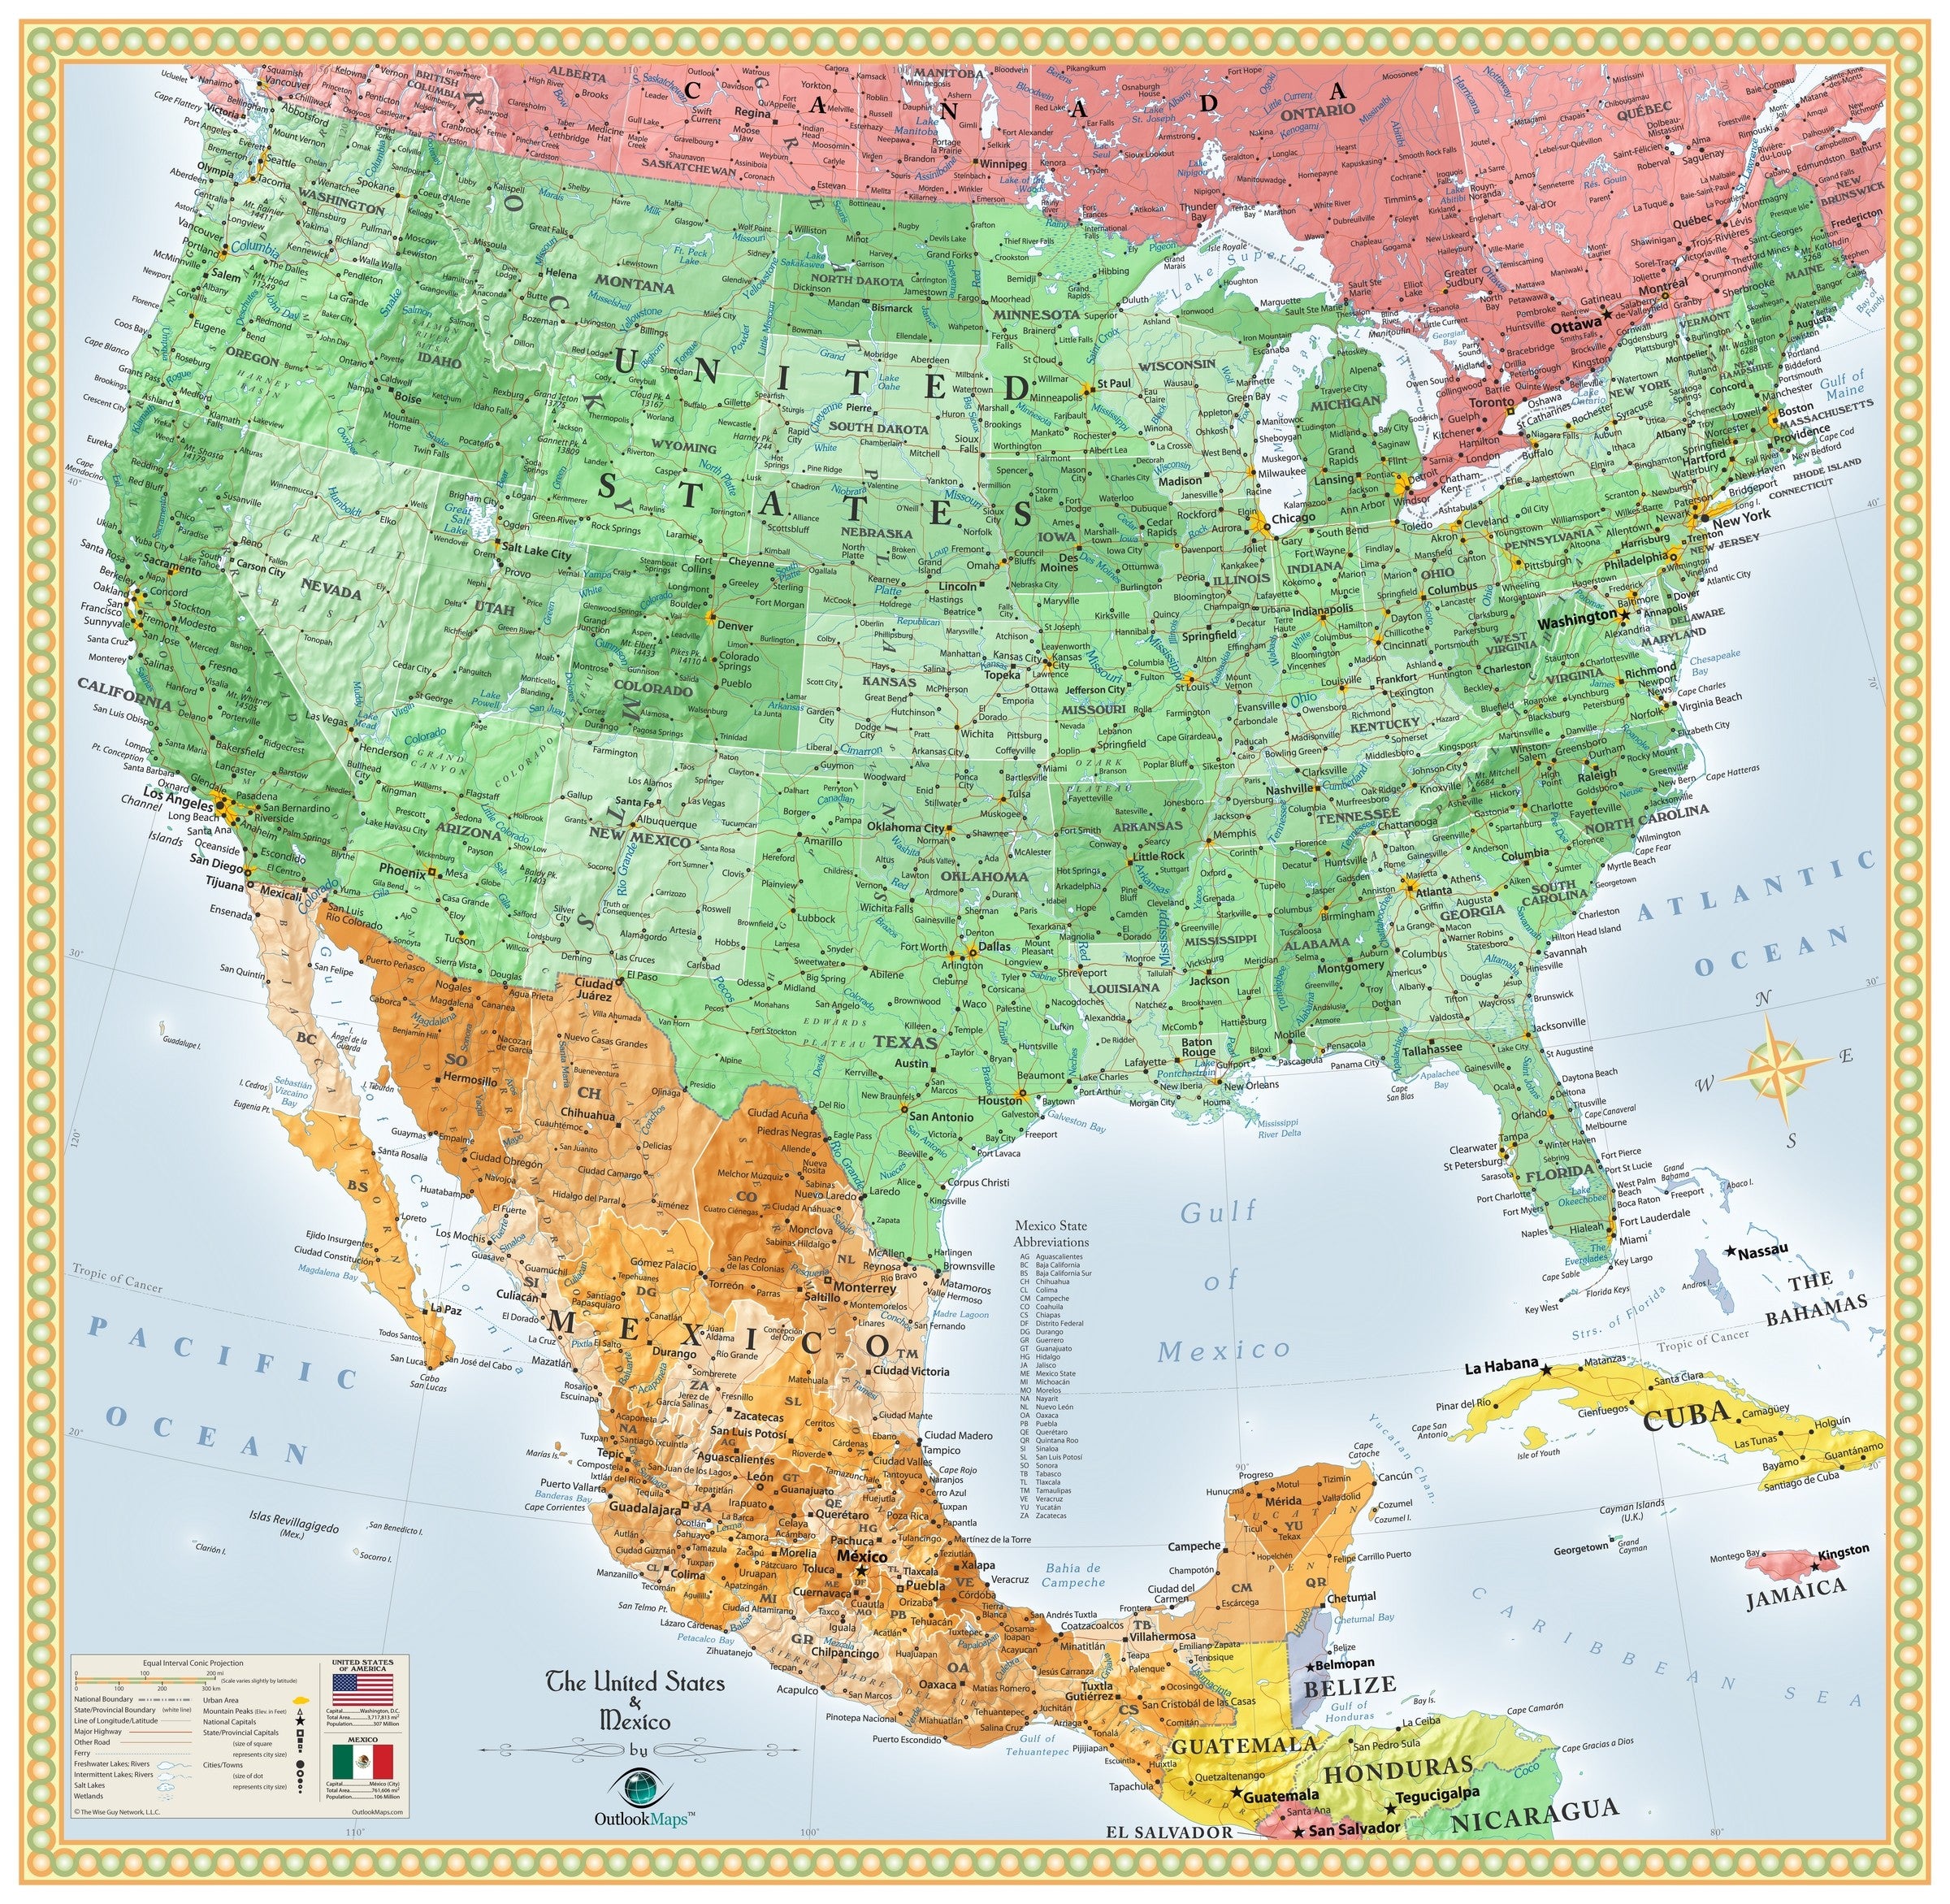 Map Of Us And Mexico USA and Mexico Wall Map | Maps.com.com